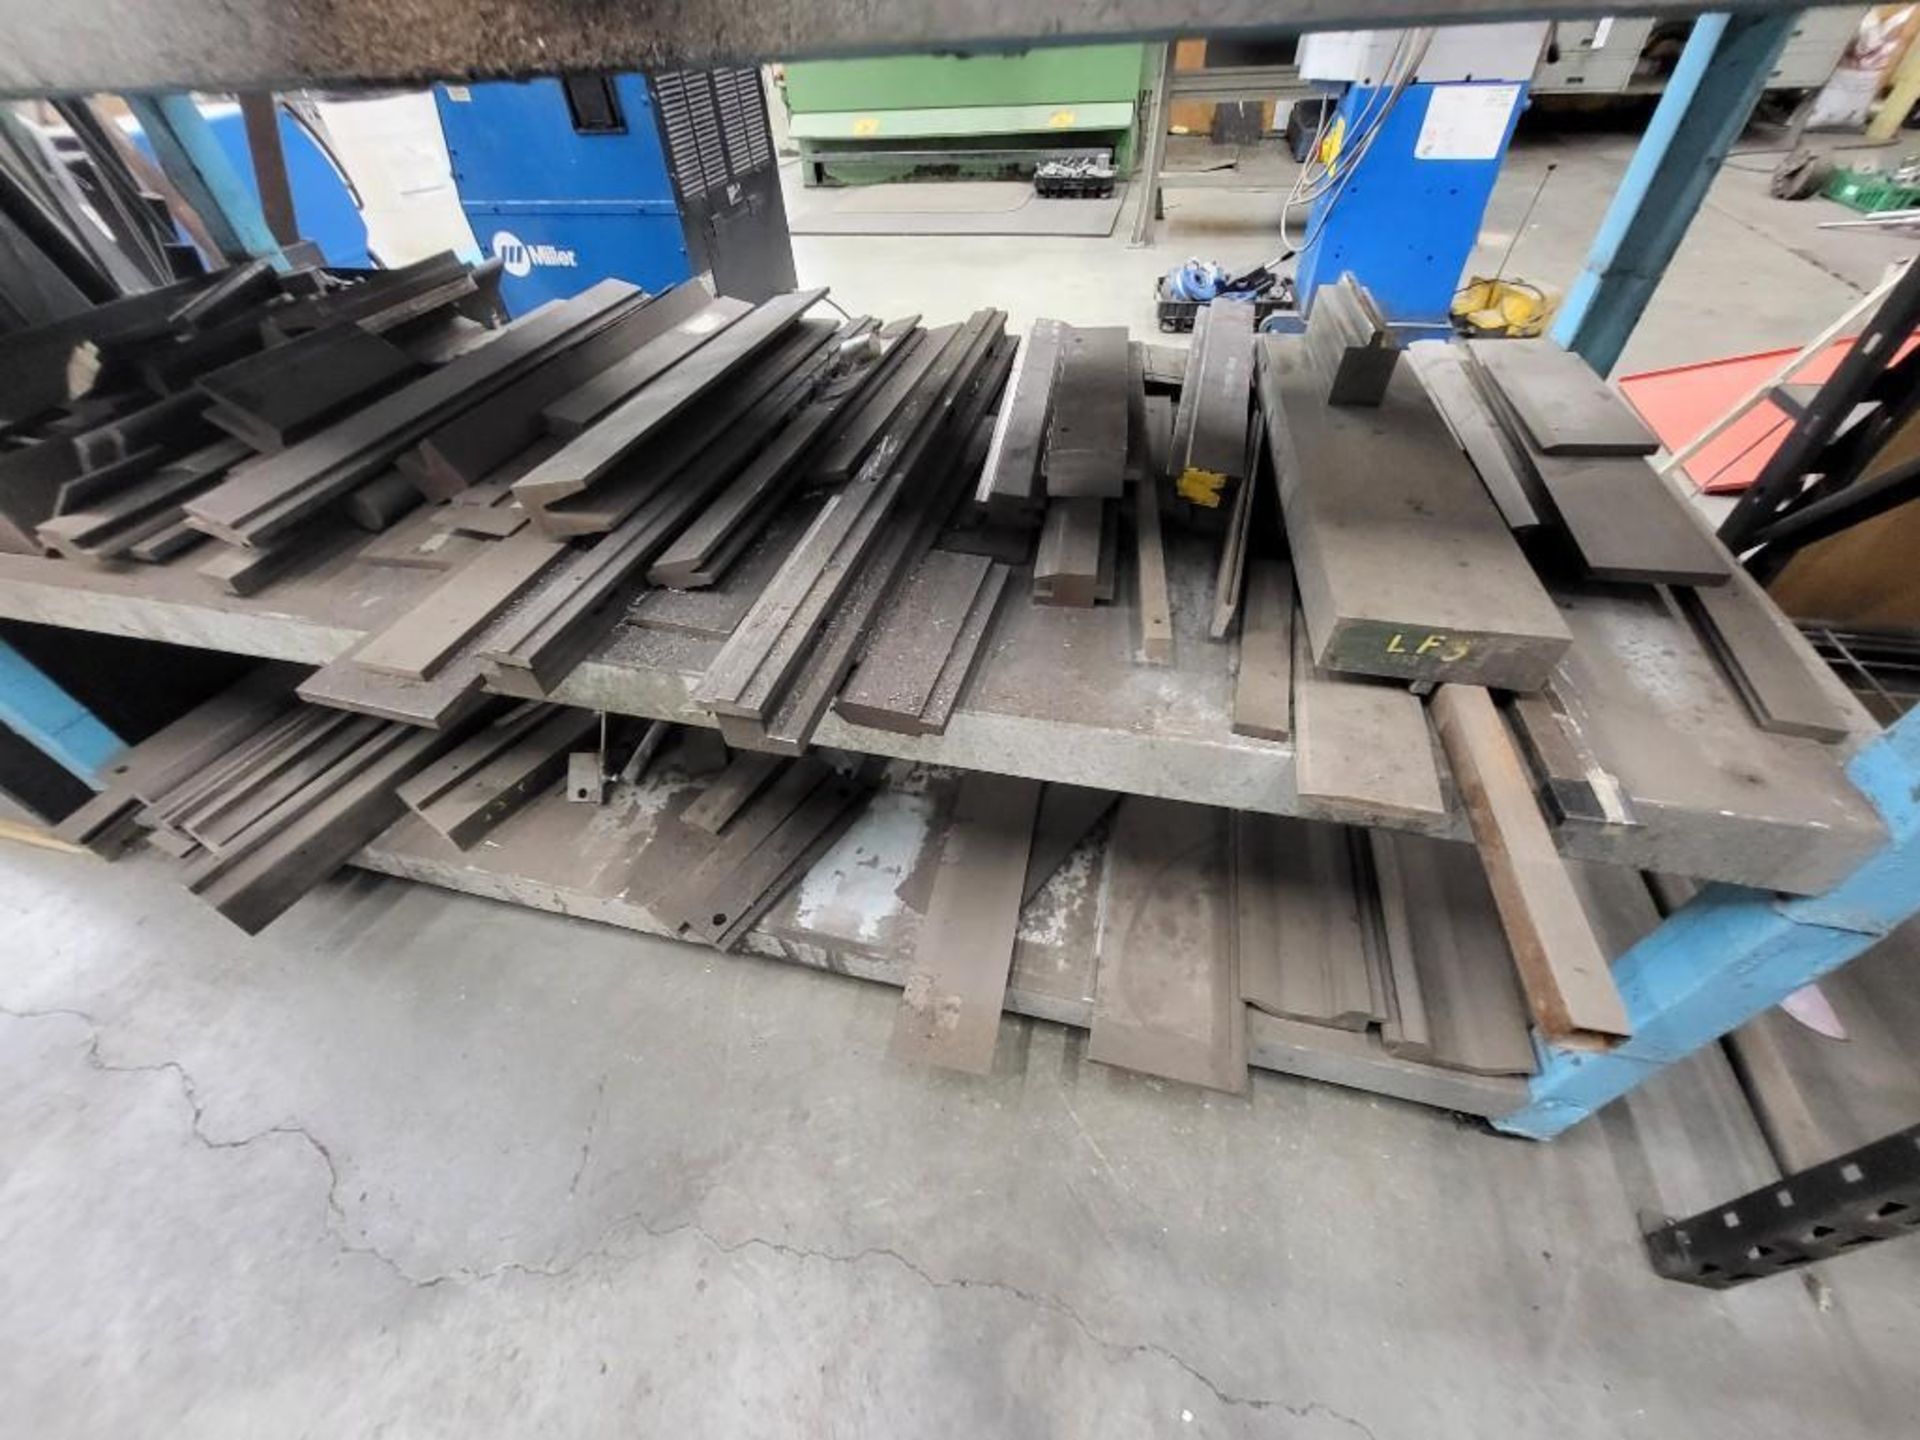 LOT OF PRESS BRAKE TOOLING WITH SHELF - Image 16 of 18